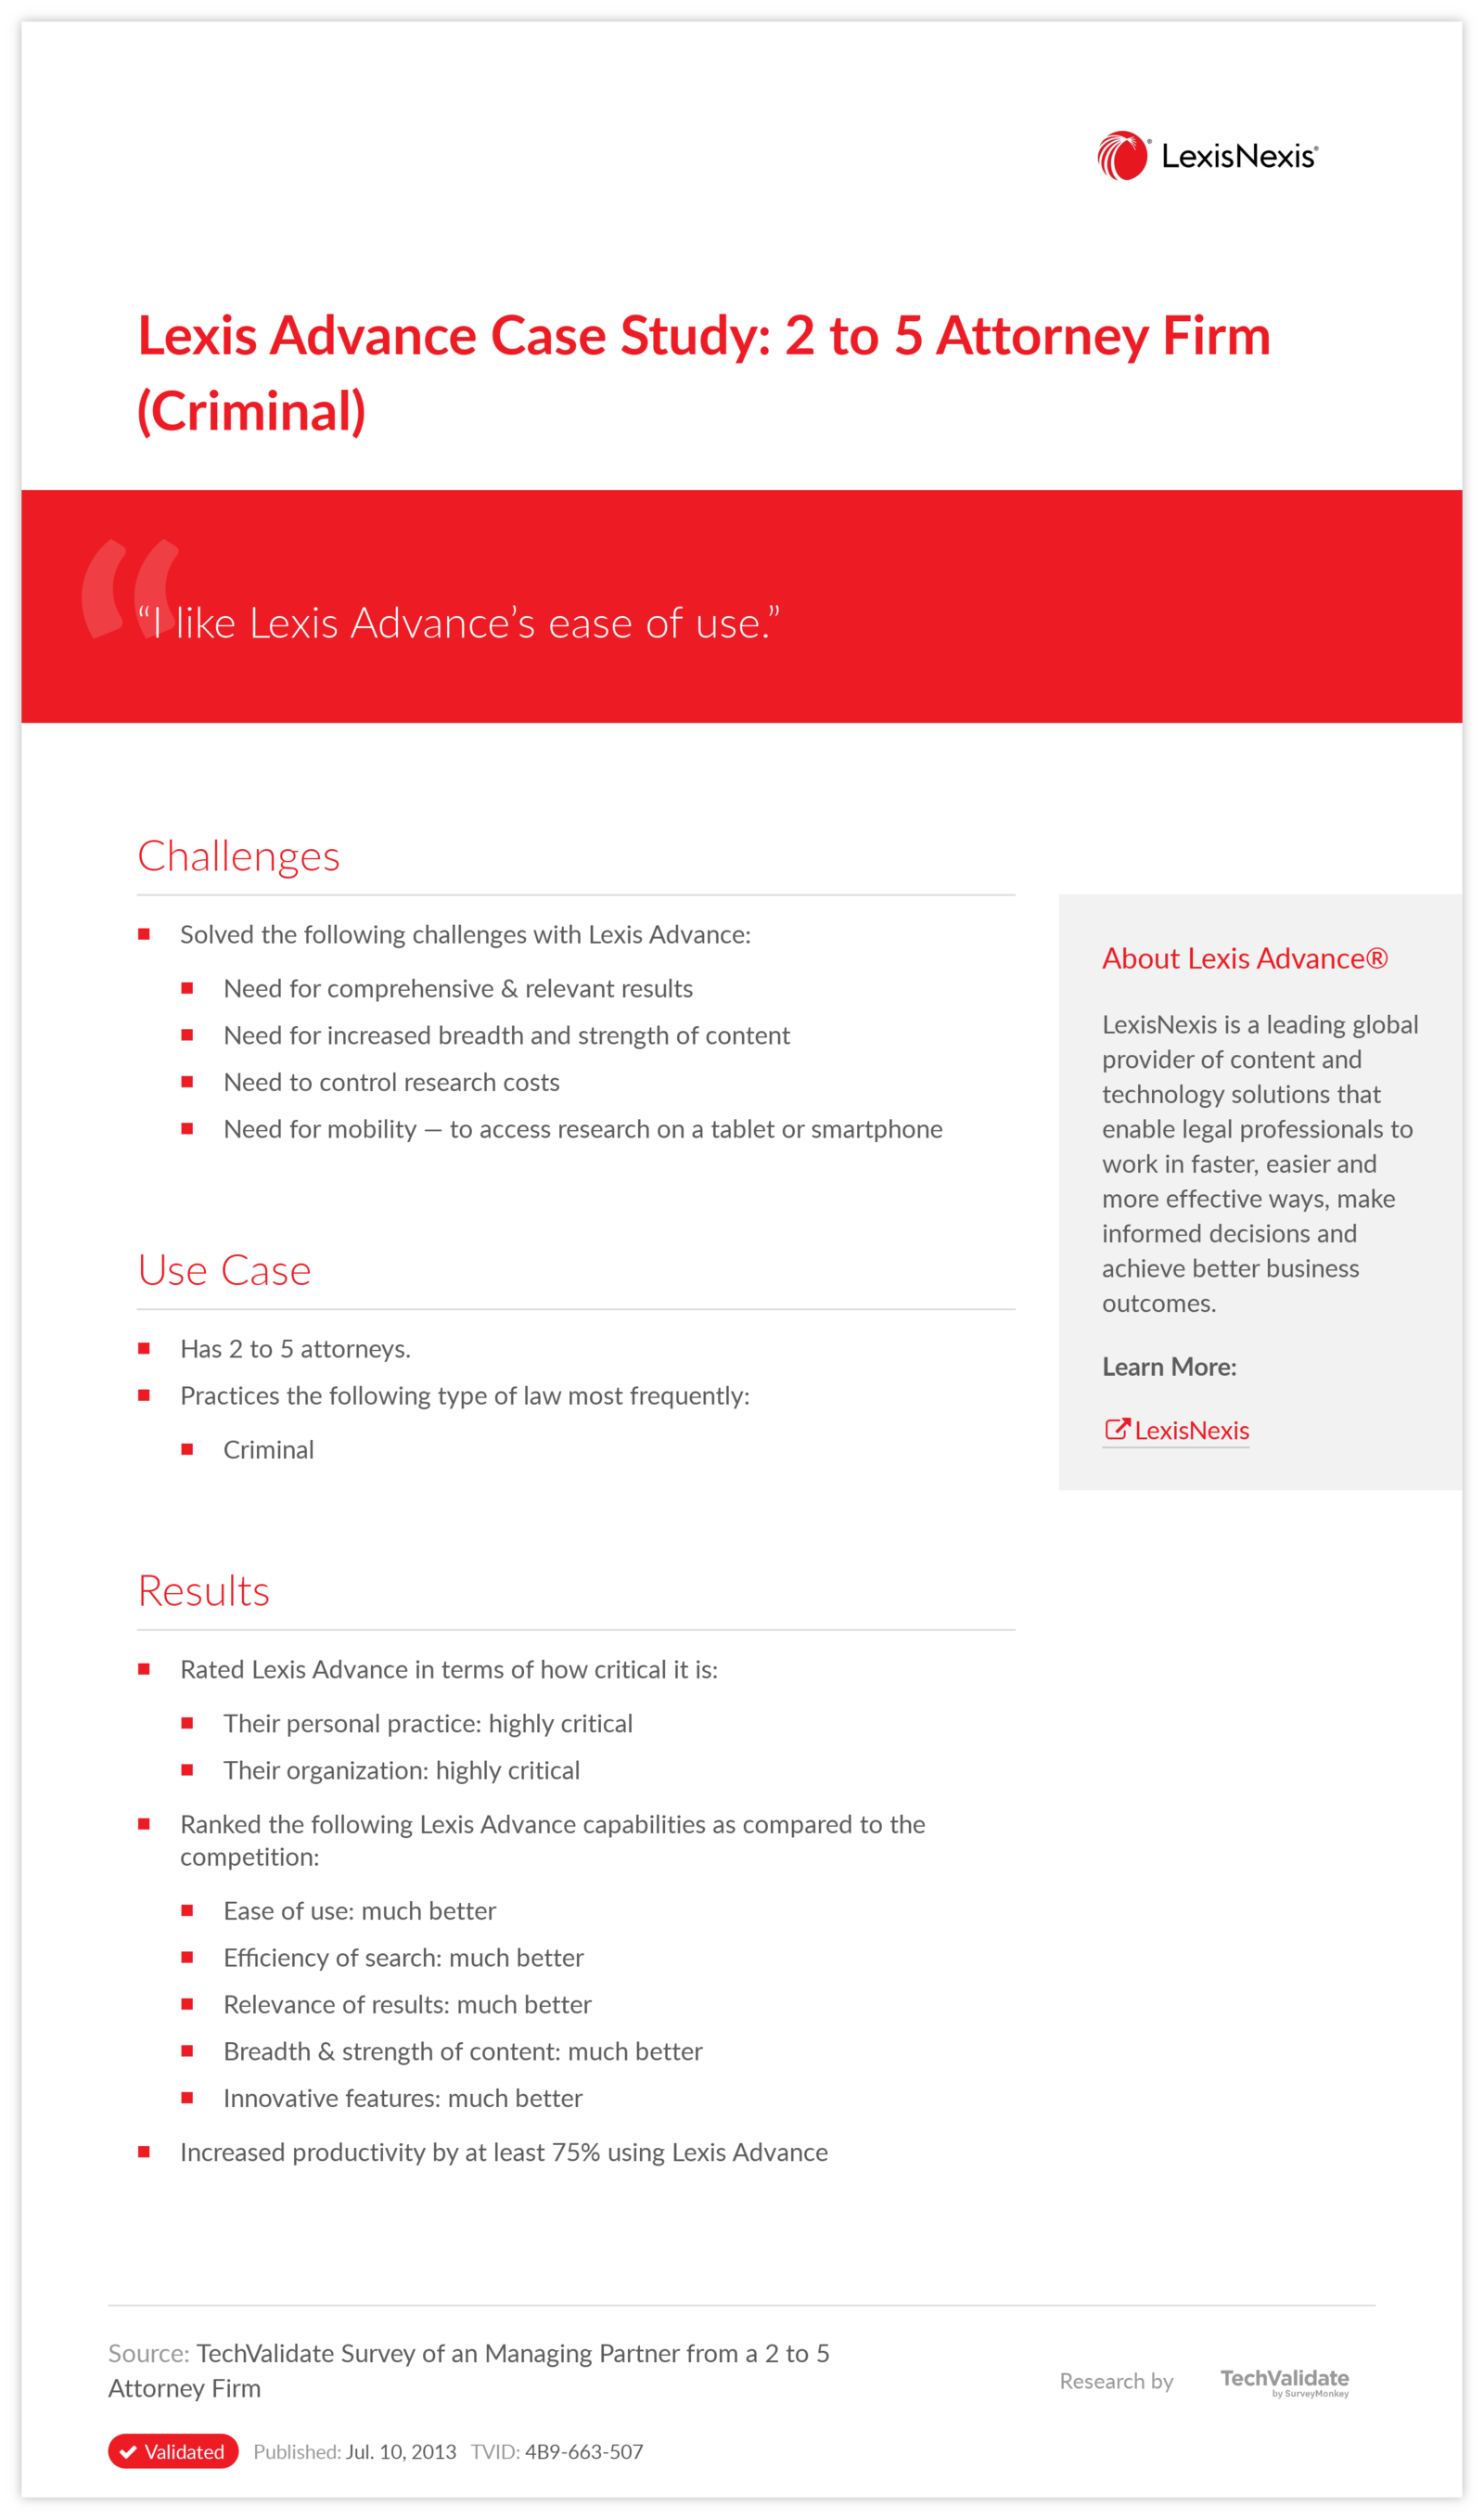 Lexis Advance Case Study: 2 to 5 Attorney Firm (Criminal)